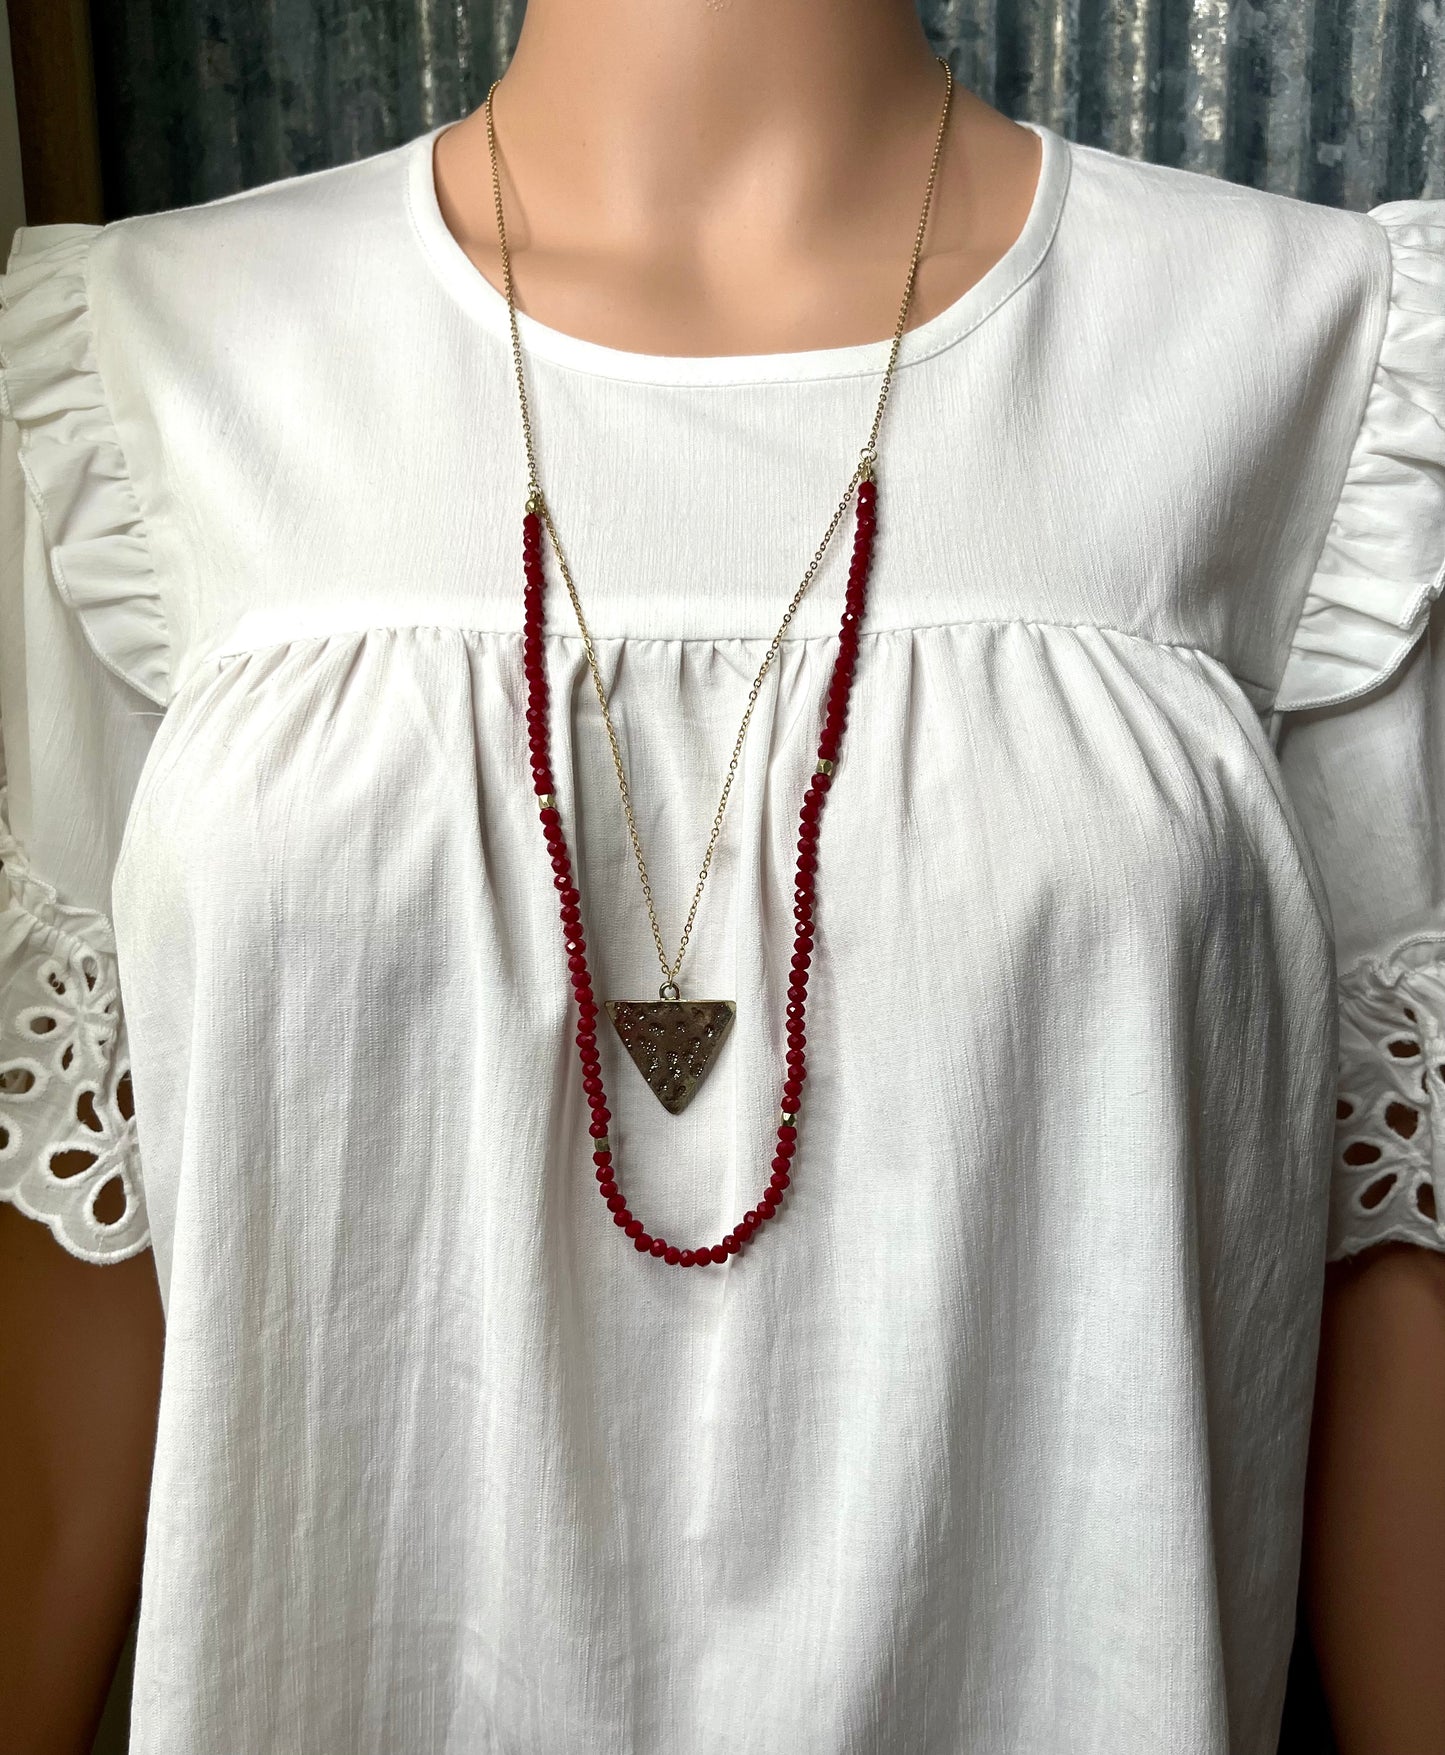 Dark Red Layered Beaded Necklace with Gold Triangle Pendant